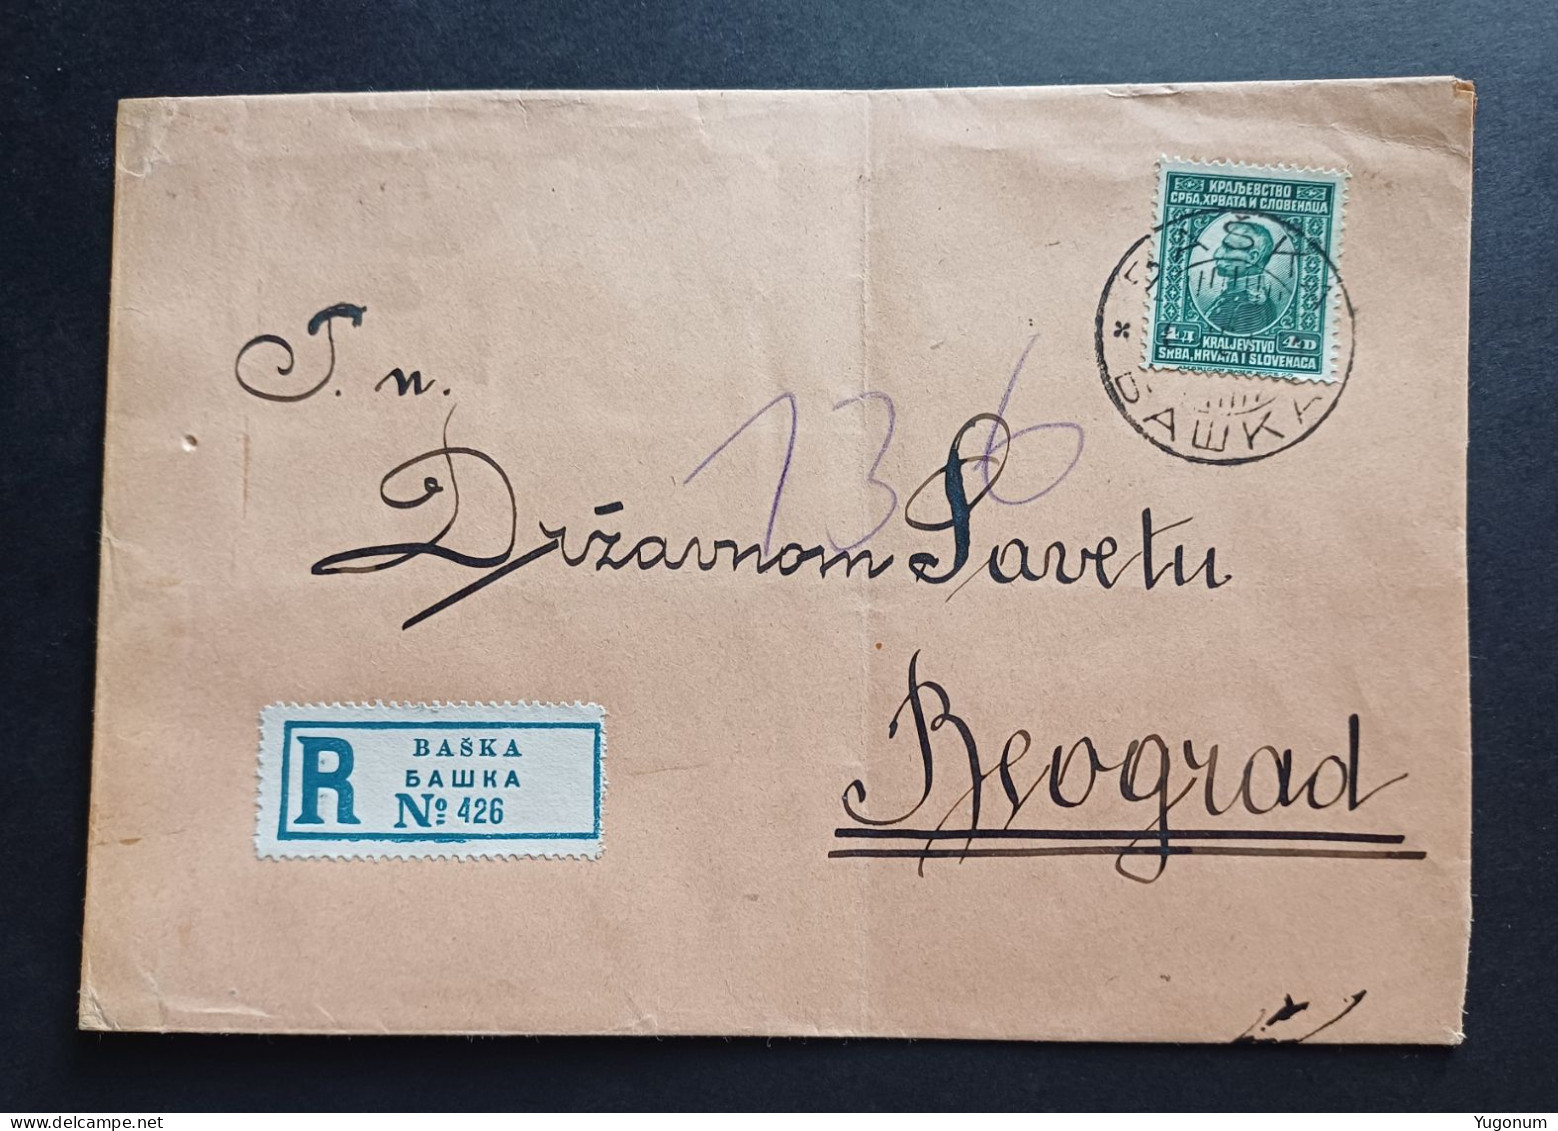 Yugoslavia Kingdom , Croatia 1920's R Letter With Stamp And R Label BAŠKA (No 3108) - Covers & Documents